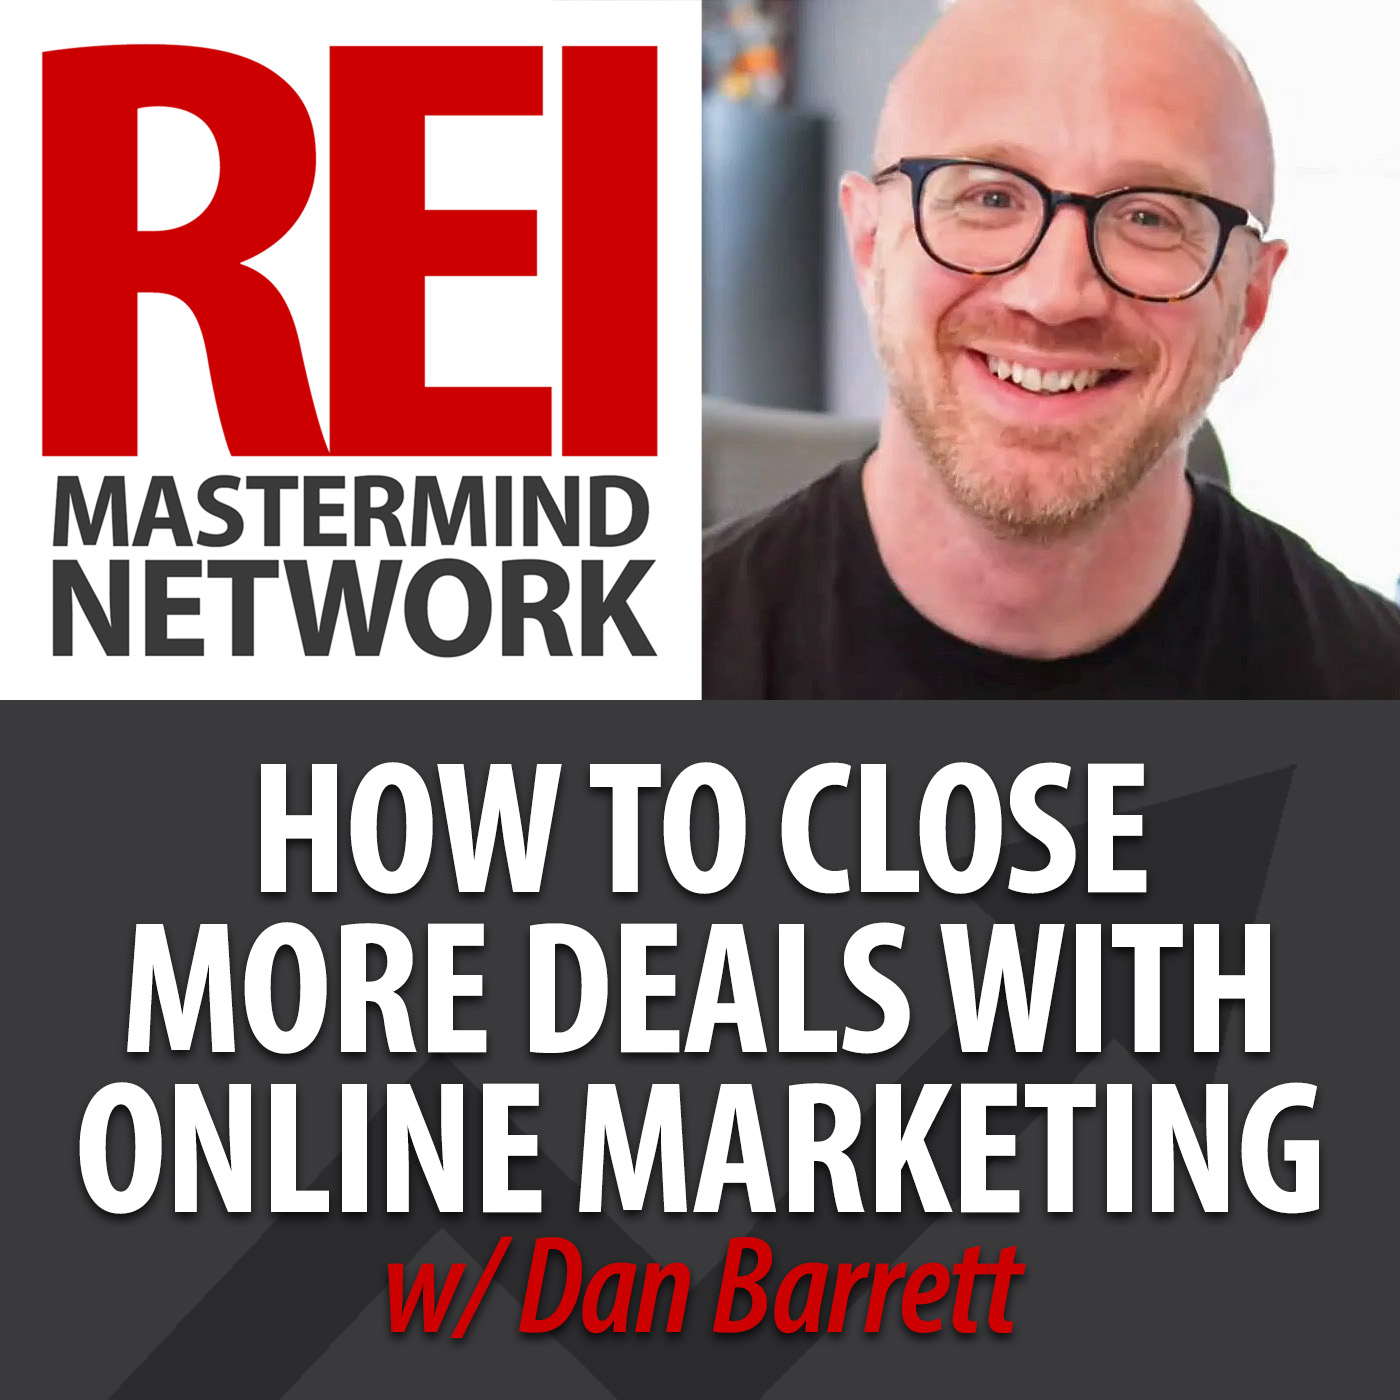 How To Close More Deals With Online Marketing with Dan Barrett